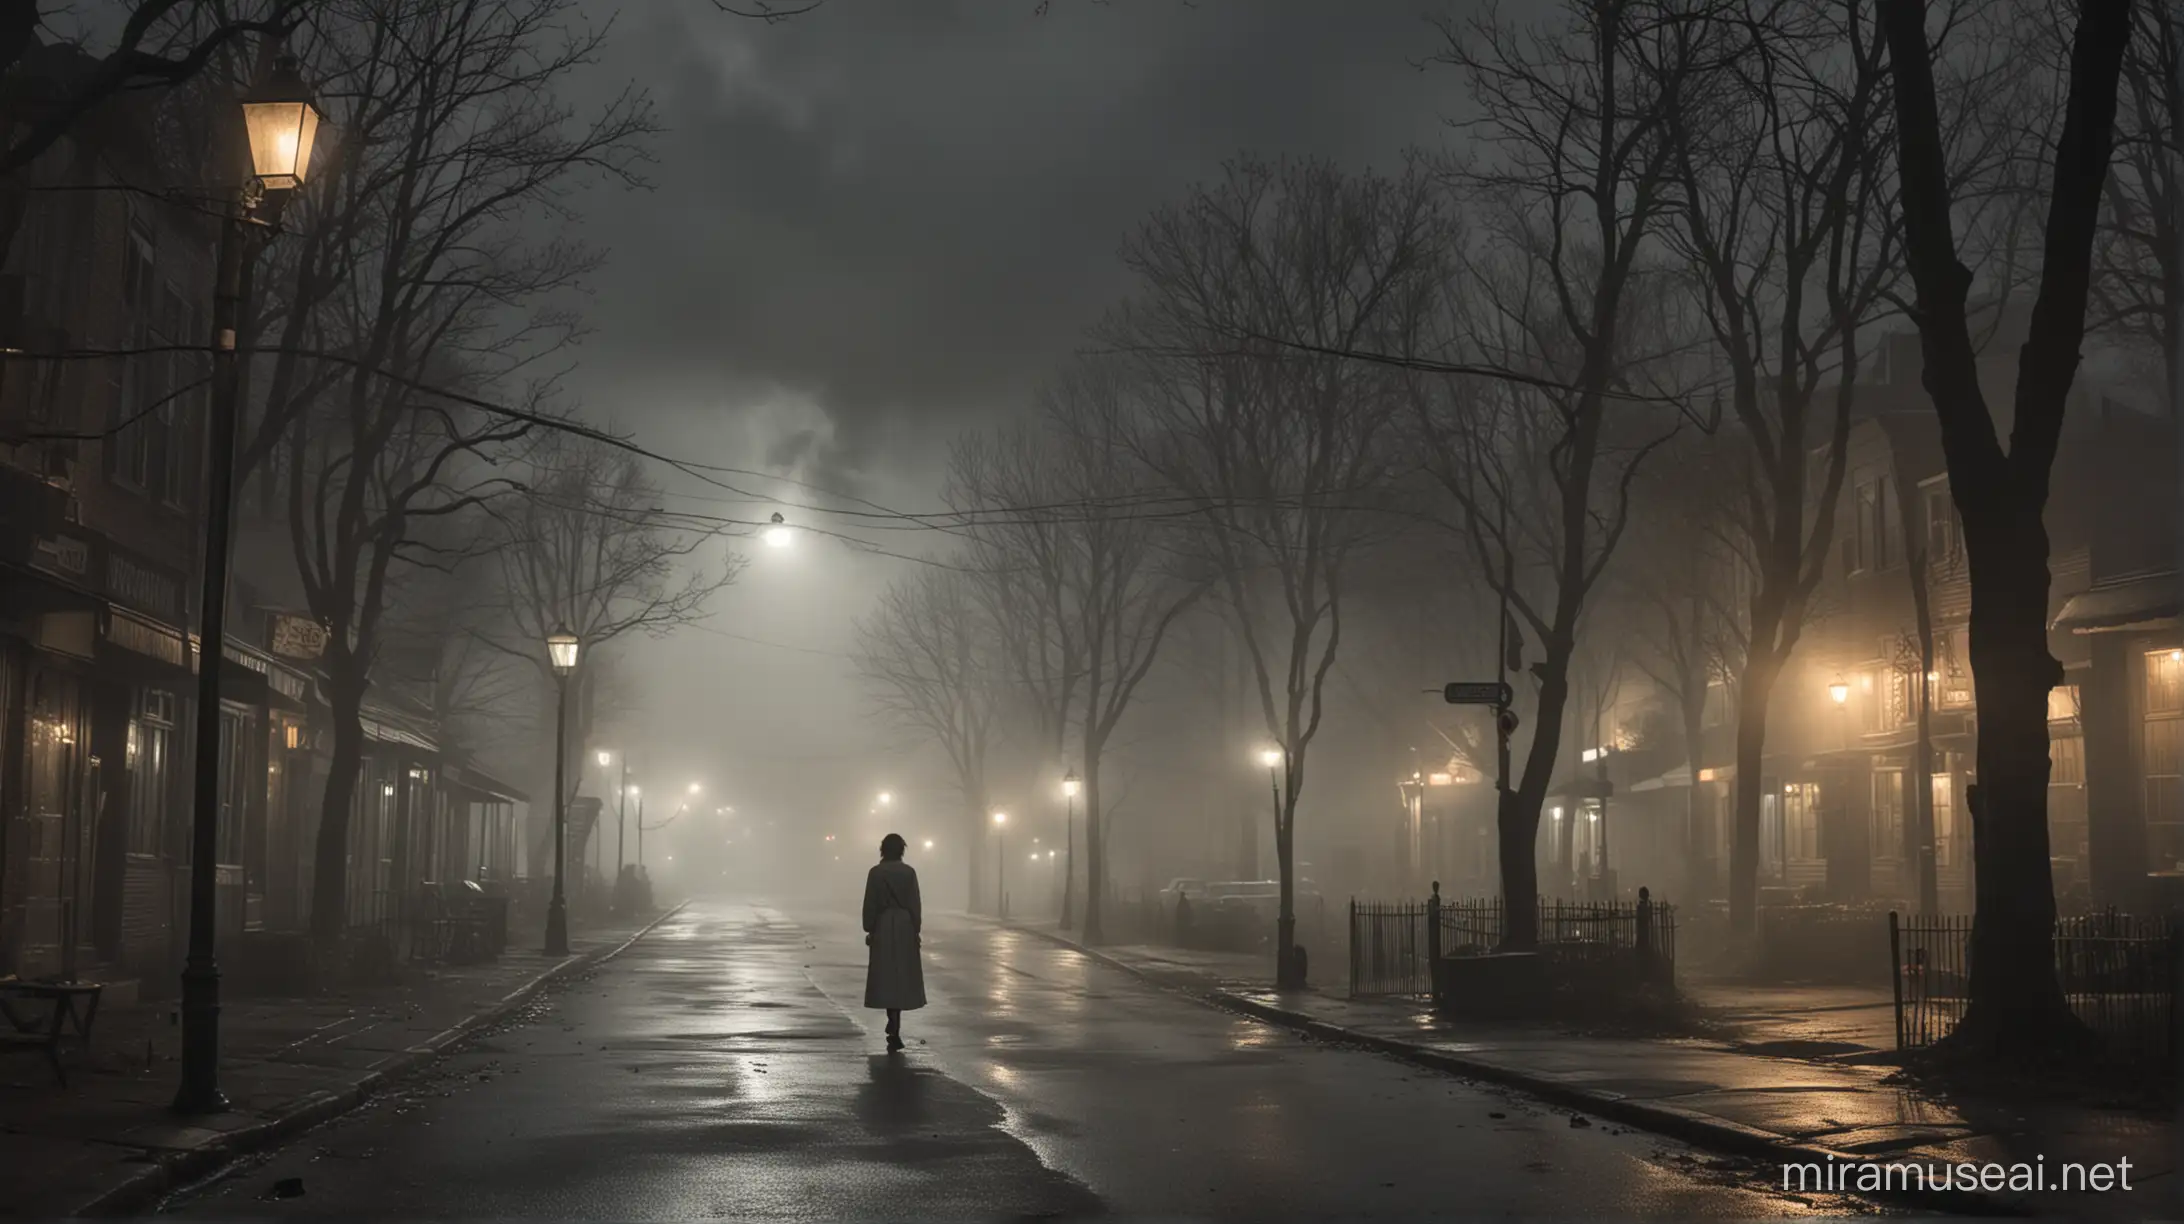  thick clouds, offered no solace, casting eerie shadows that danced menacingly across the landscape. In the heart of a small, secluded town nestled amidst ancient forests, a lone figure named Emily found herself walking home from a late shift at the diner. The streetlights flickered ominously, as if struggling against some unseen force.